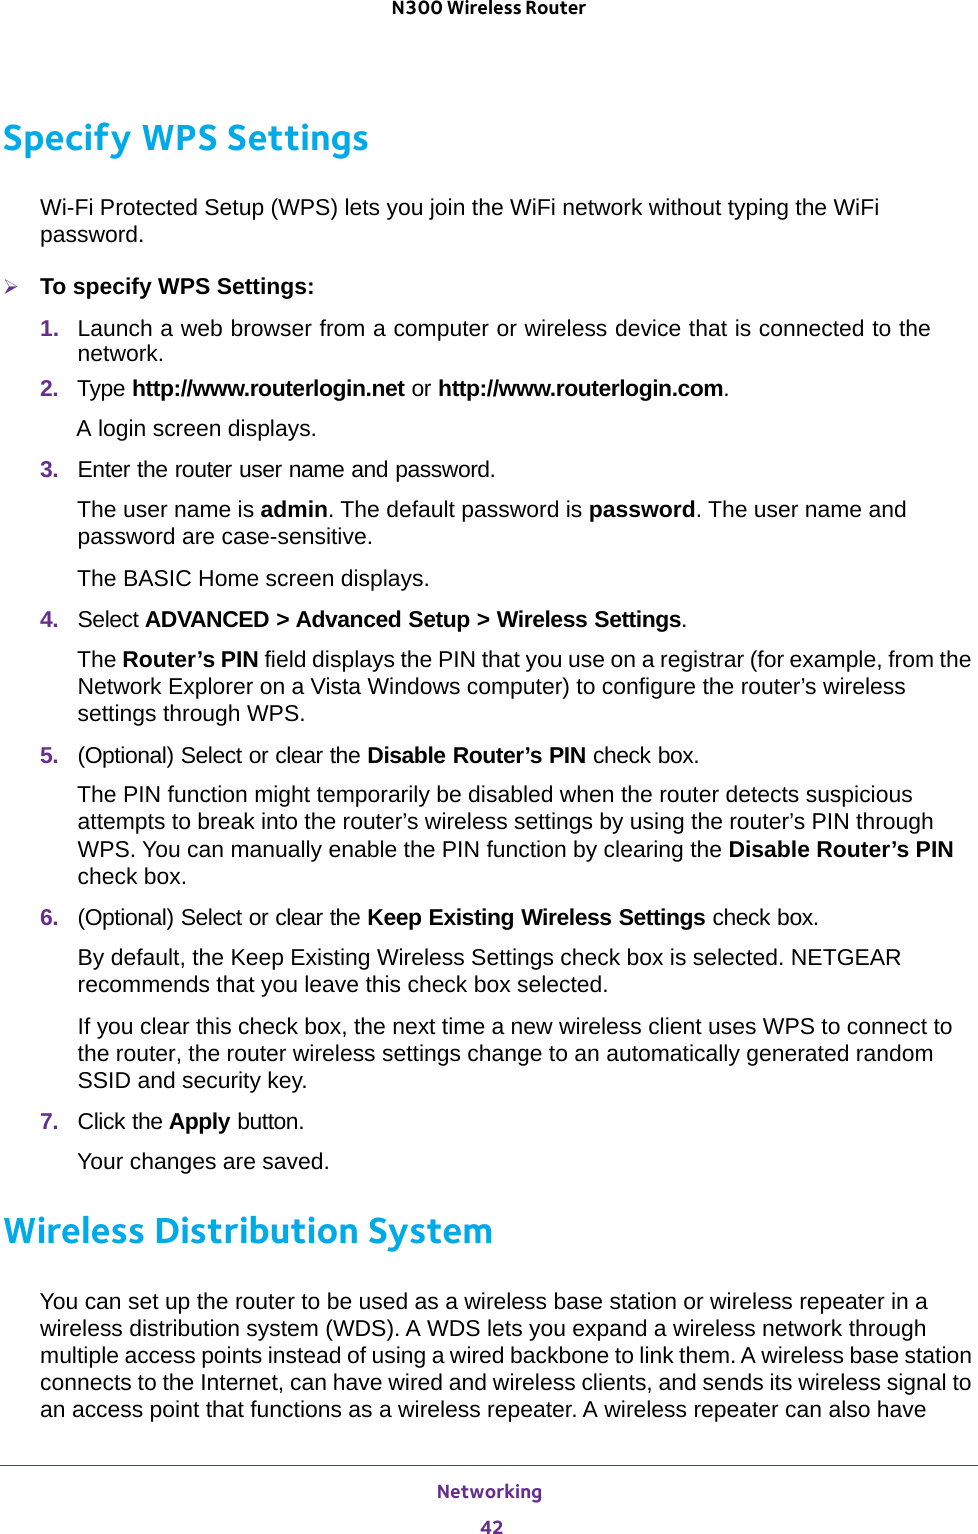 Networking 42N300 Wireless Router Specify WPS SettingsWi-Fi Protected Setup (WPS) lets you join the WiFi network without typing the WiFi password.To specify WPS Settings:1.  Launch a web browser from a computer or wireless device that is connected to the network.2.  Type http://www.routerlogin.net or http://www.routerlogin.com.A login screen displays.3.  Enter the router user name and password.The user name is admin. The default password is password. The user name and password are case-sensitive.The BASIC Home screen displays.4.  Select ADVANCED &gt; Advanced Setup &gt; Wireless Settings.The Router’s PIN field displays the PIN that you use on a registrar (for example, from the Network Explorer on a Vista Windows computer) to configure the router’s wireless settings through WPS. 5.  (Optional) Select or clear the Disable Router’s PIN check box.The PIN function might temporarily be disabled when the router detects suspicious attempts to break into the router’s wireless settings by using the router’s PIN through WPS. You can manually enable the PIN function by clearing the Disable Router’s PIN check box.6.  (Optional) Select or clear the Keep Existing Wireless Settings check box.By default, the Keep Existing Wireless Settings check box is selected. NETGEAR recommends that you leave this check box selected.If you clear this check box, the next time a new wireless client uses WPS to connect to the router, the router wireless settings change to an automatically generated random SSID and security key. 7.  Click the Apply button.Your changes are saved.Wireless Distribution SystemYou can set up the router to be used as a wireless base station or wireless repeater in a wireless distribution system (WDS). A WDS lets you expand a wireless network through multiple access points instead of using a wired backbone to link them. A wireless base station connects to the Internet, can have wired and wireless clients, and sends its wireless signal to an access point that functions as a wireless repeater. A wireless repeater can also have 